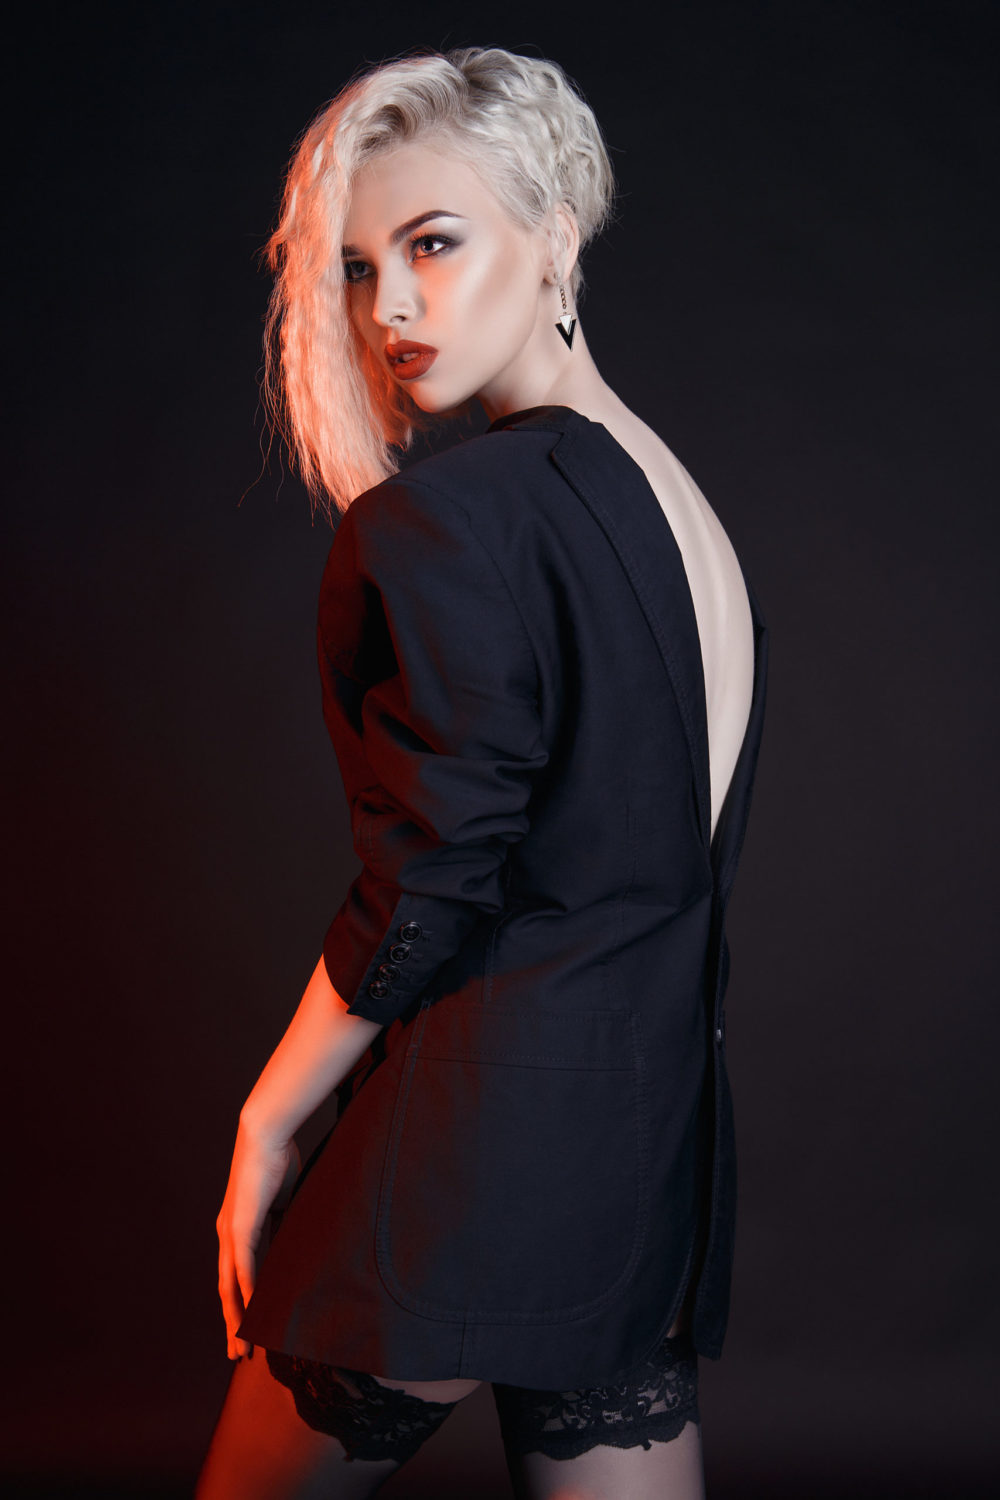 Woman with Platinum Asymmetrical Bixie Cut, one of the top short blonde hair styles